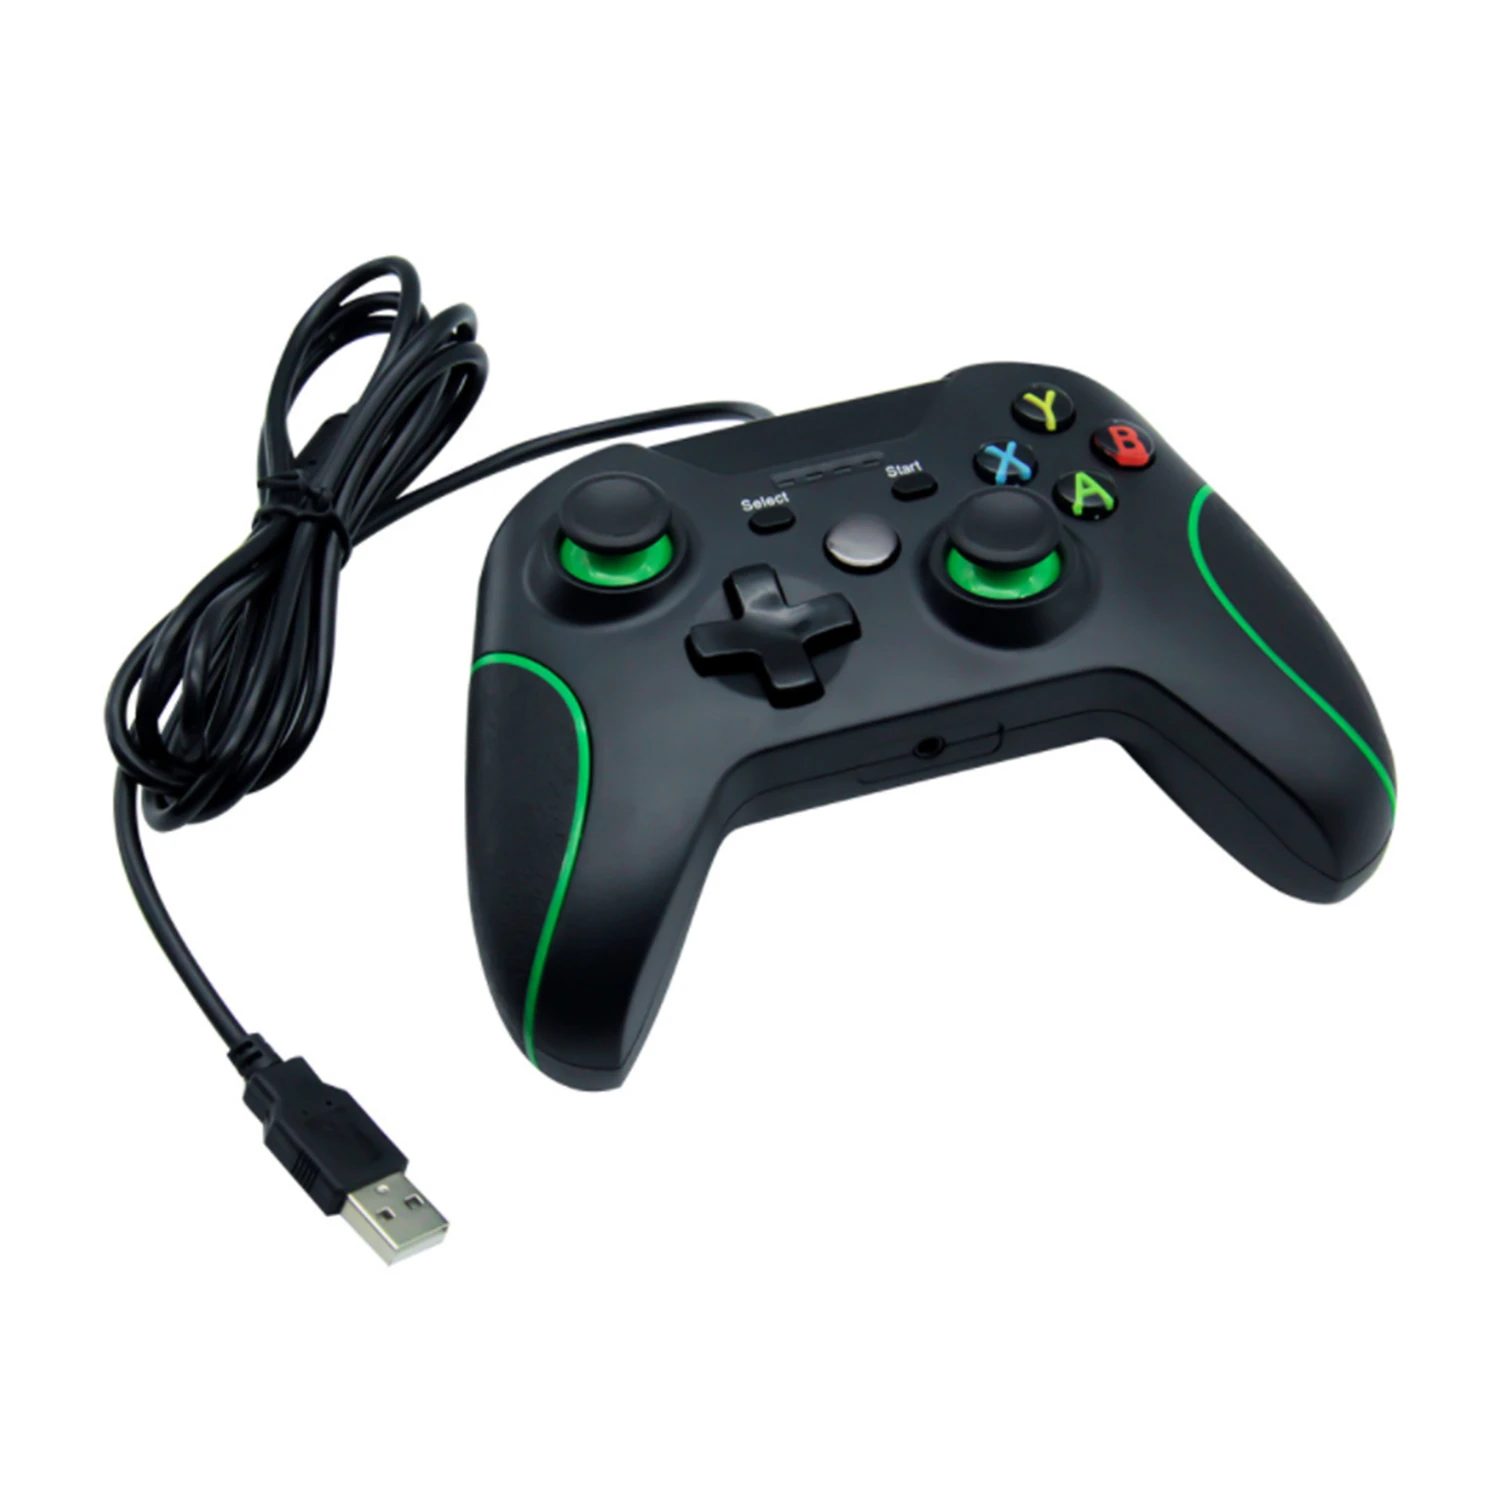 Premium Wired Controller for the Xbox One Consoles and PC - Black